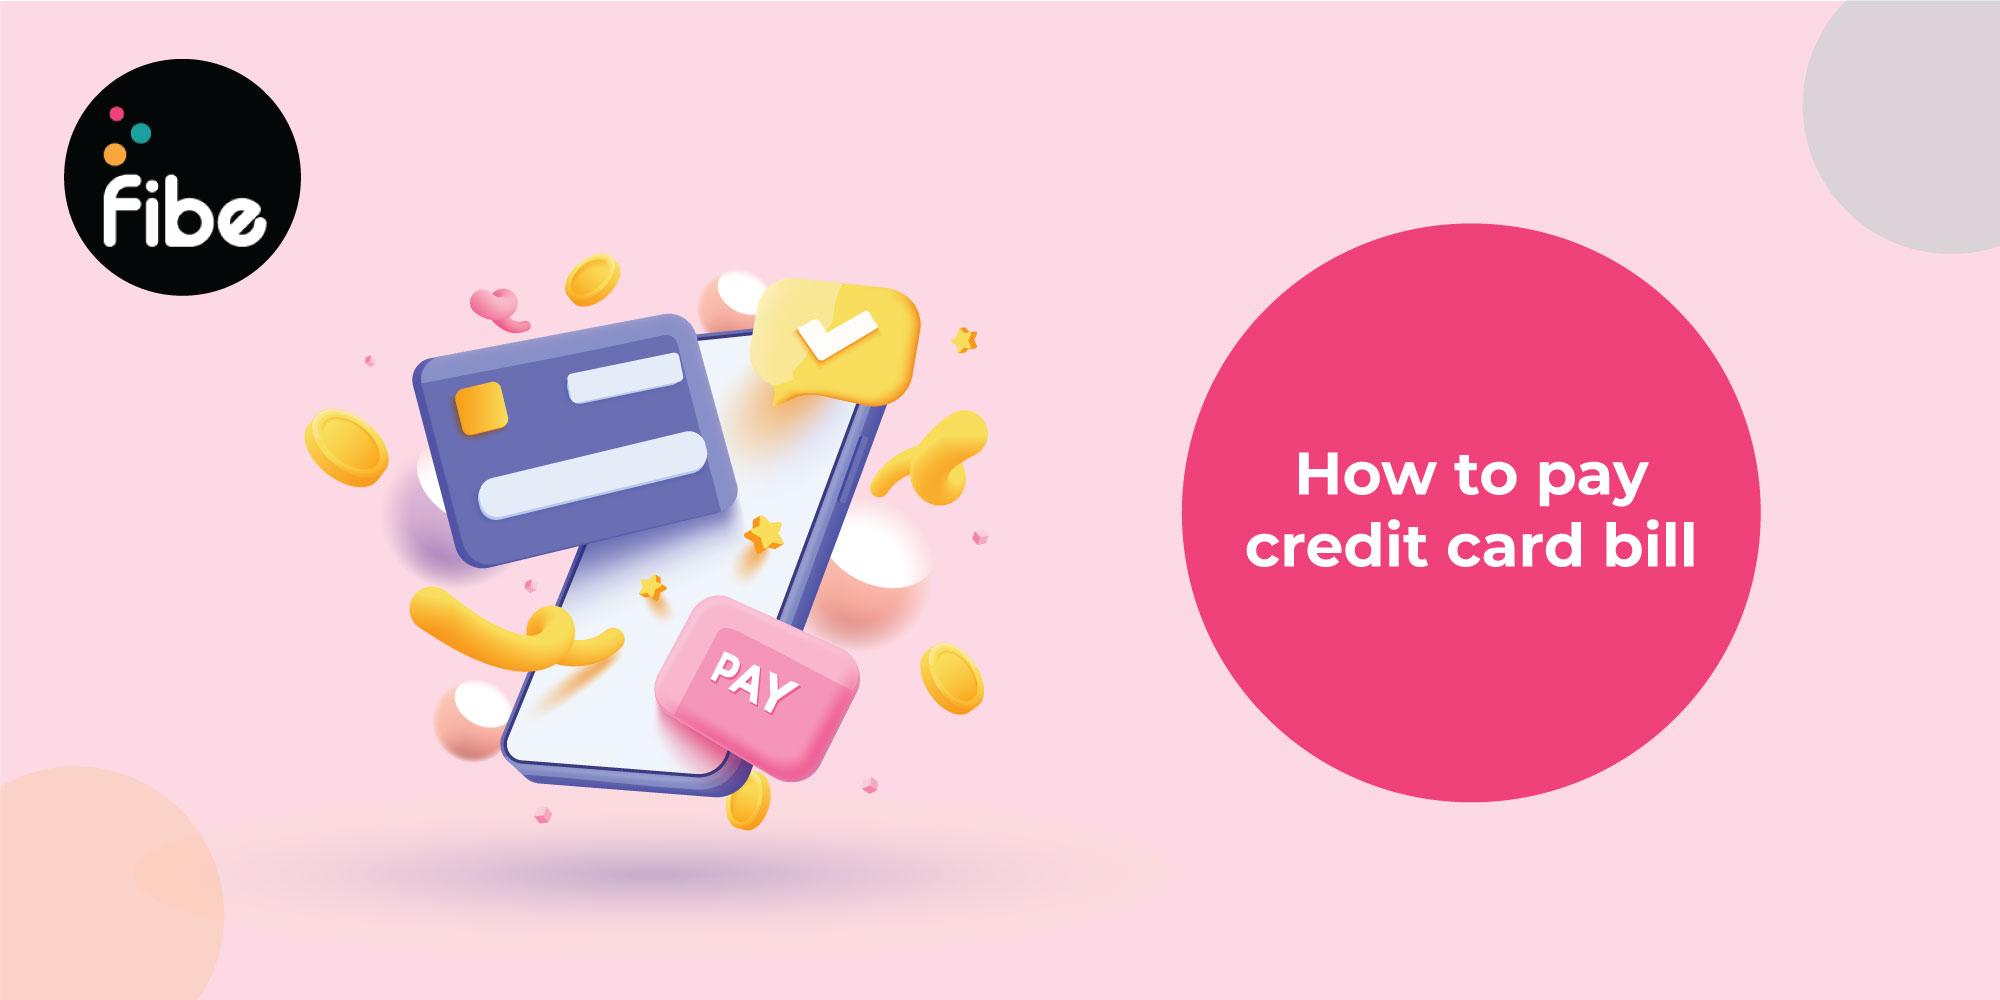 What is the best way to make the payment of Credit Card bills?